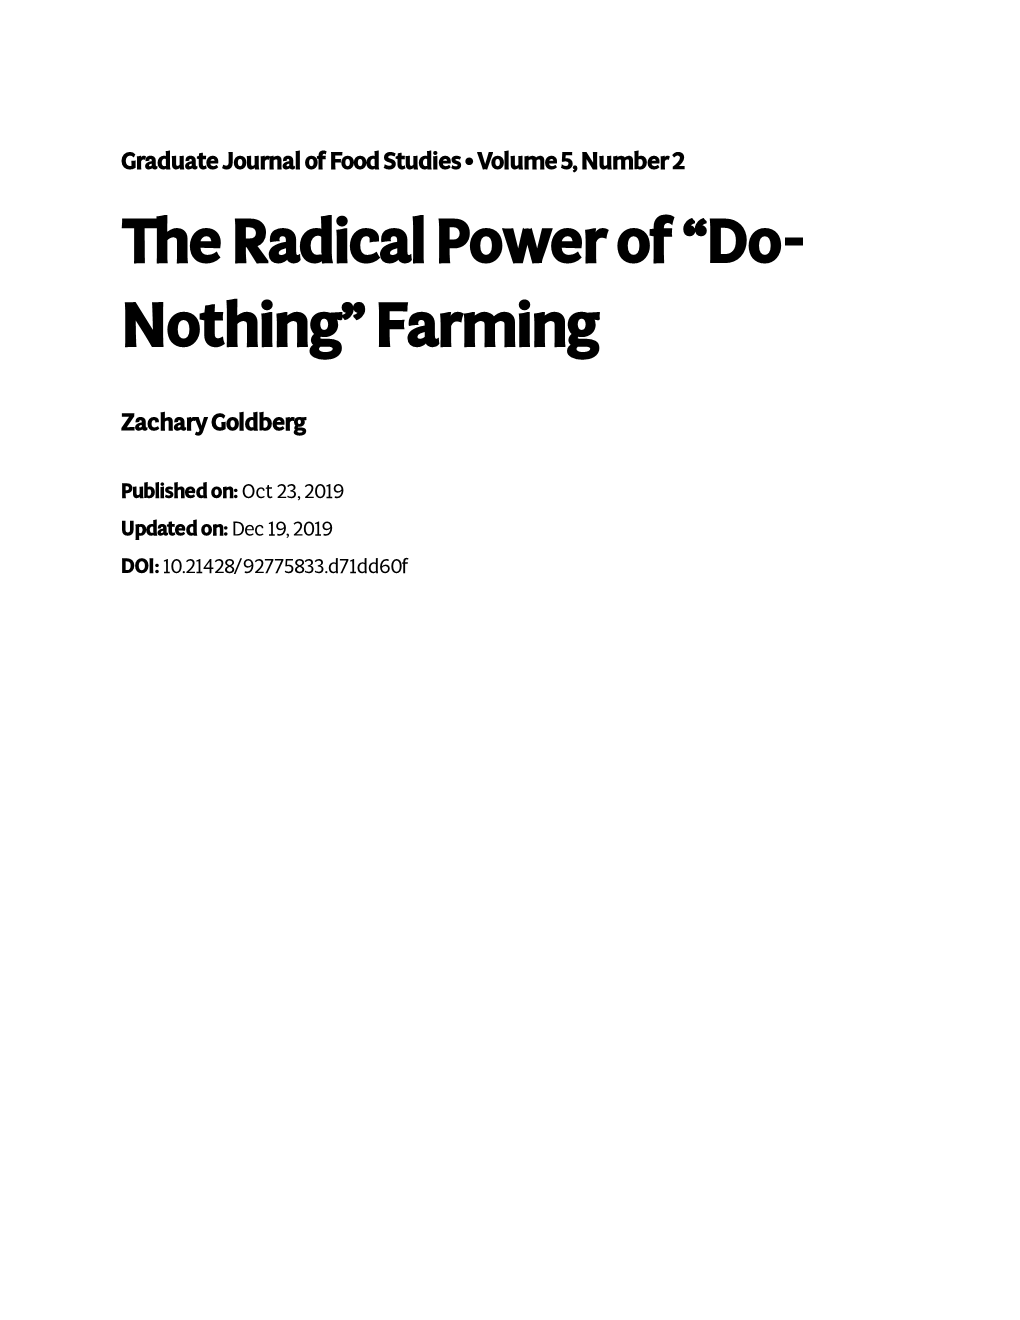 The Radical Power of ˝Do-Nothing˛ Farming